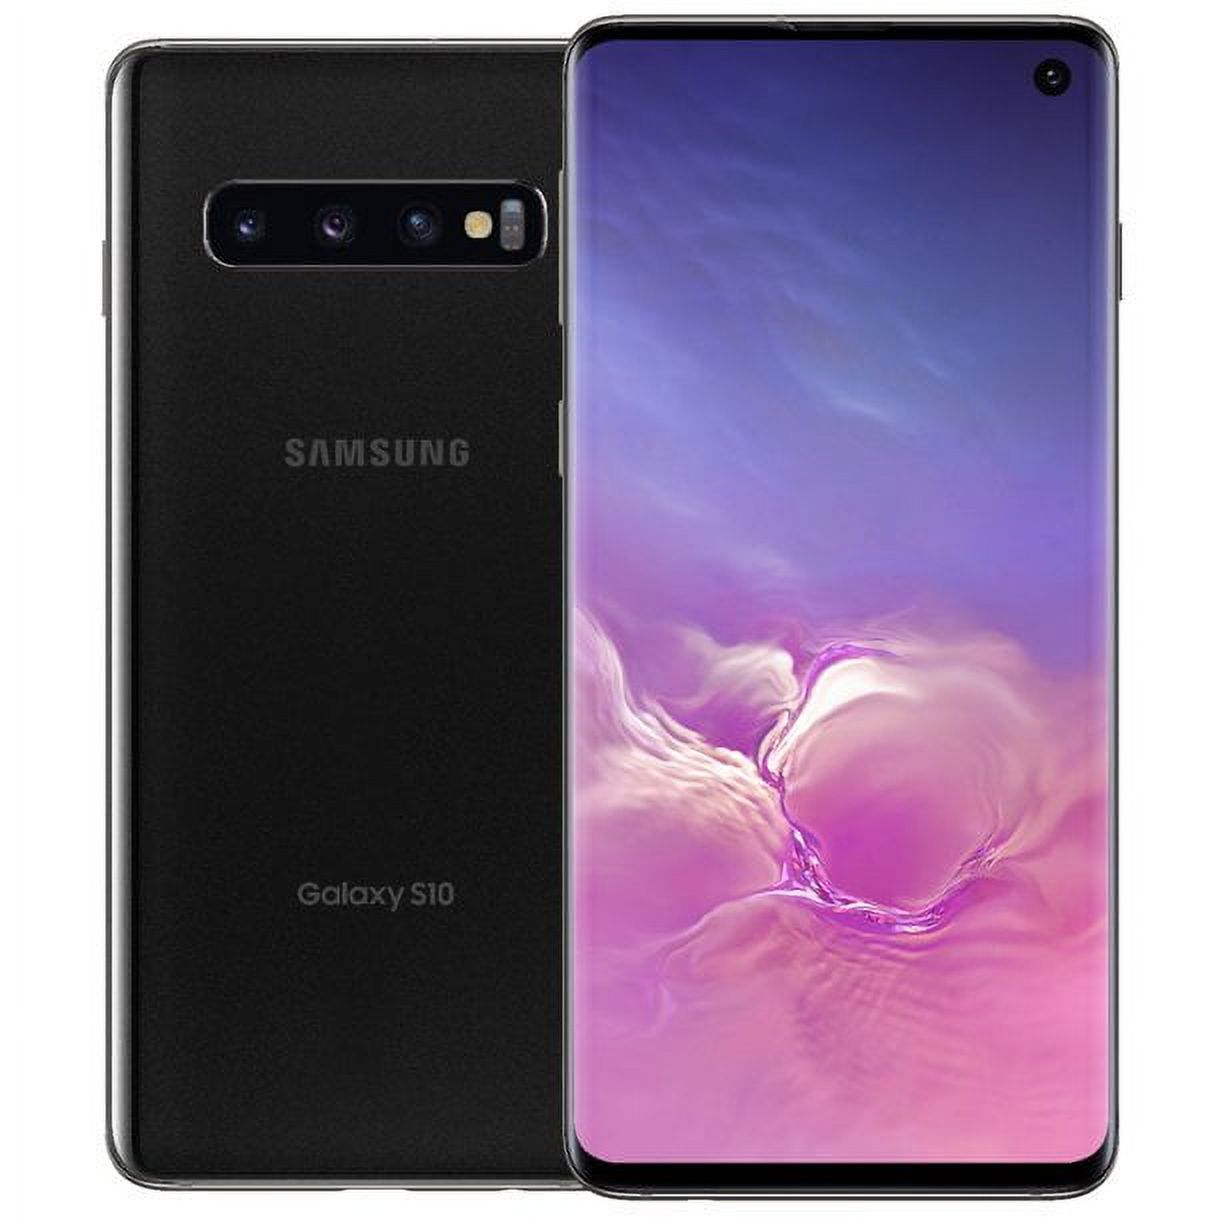 Restored SAMSUNG G973 Galaxy S10, 128 GB, Prism Black - Fully Unlocked - GSM and CDMA Compatible (Refurbished) - image 1 of 7